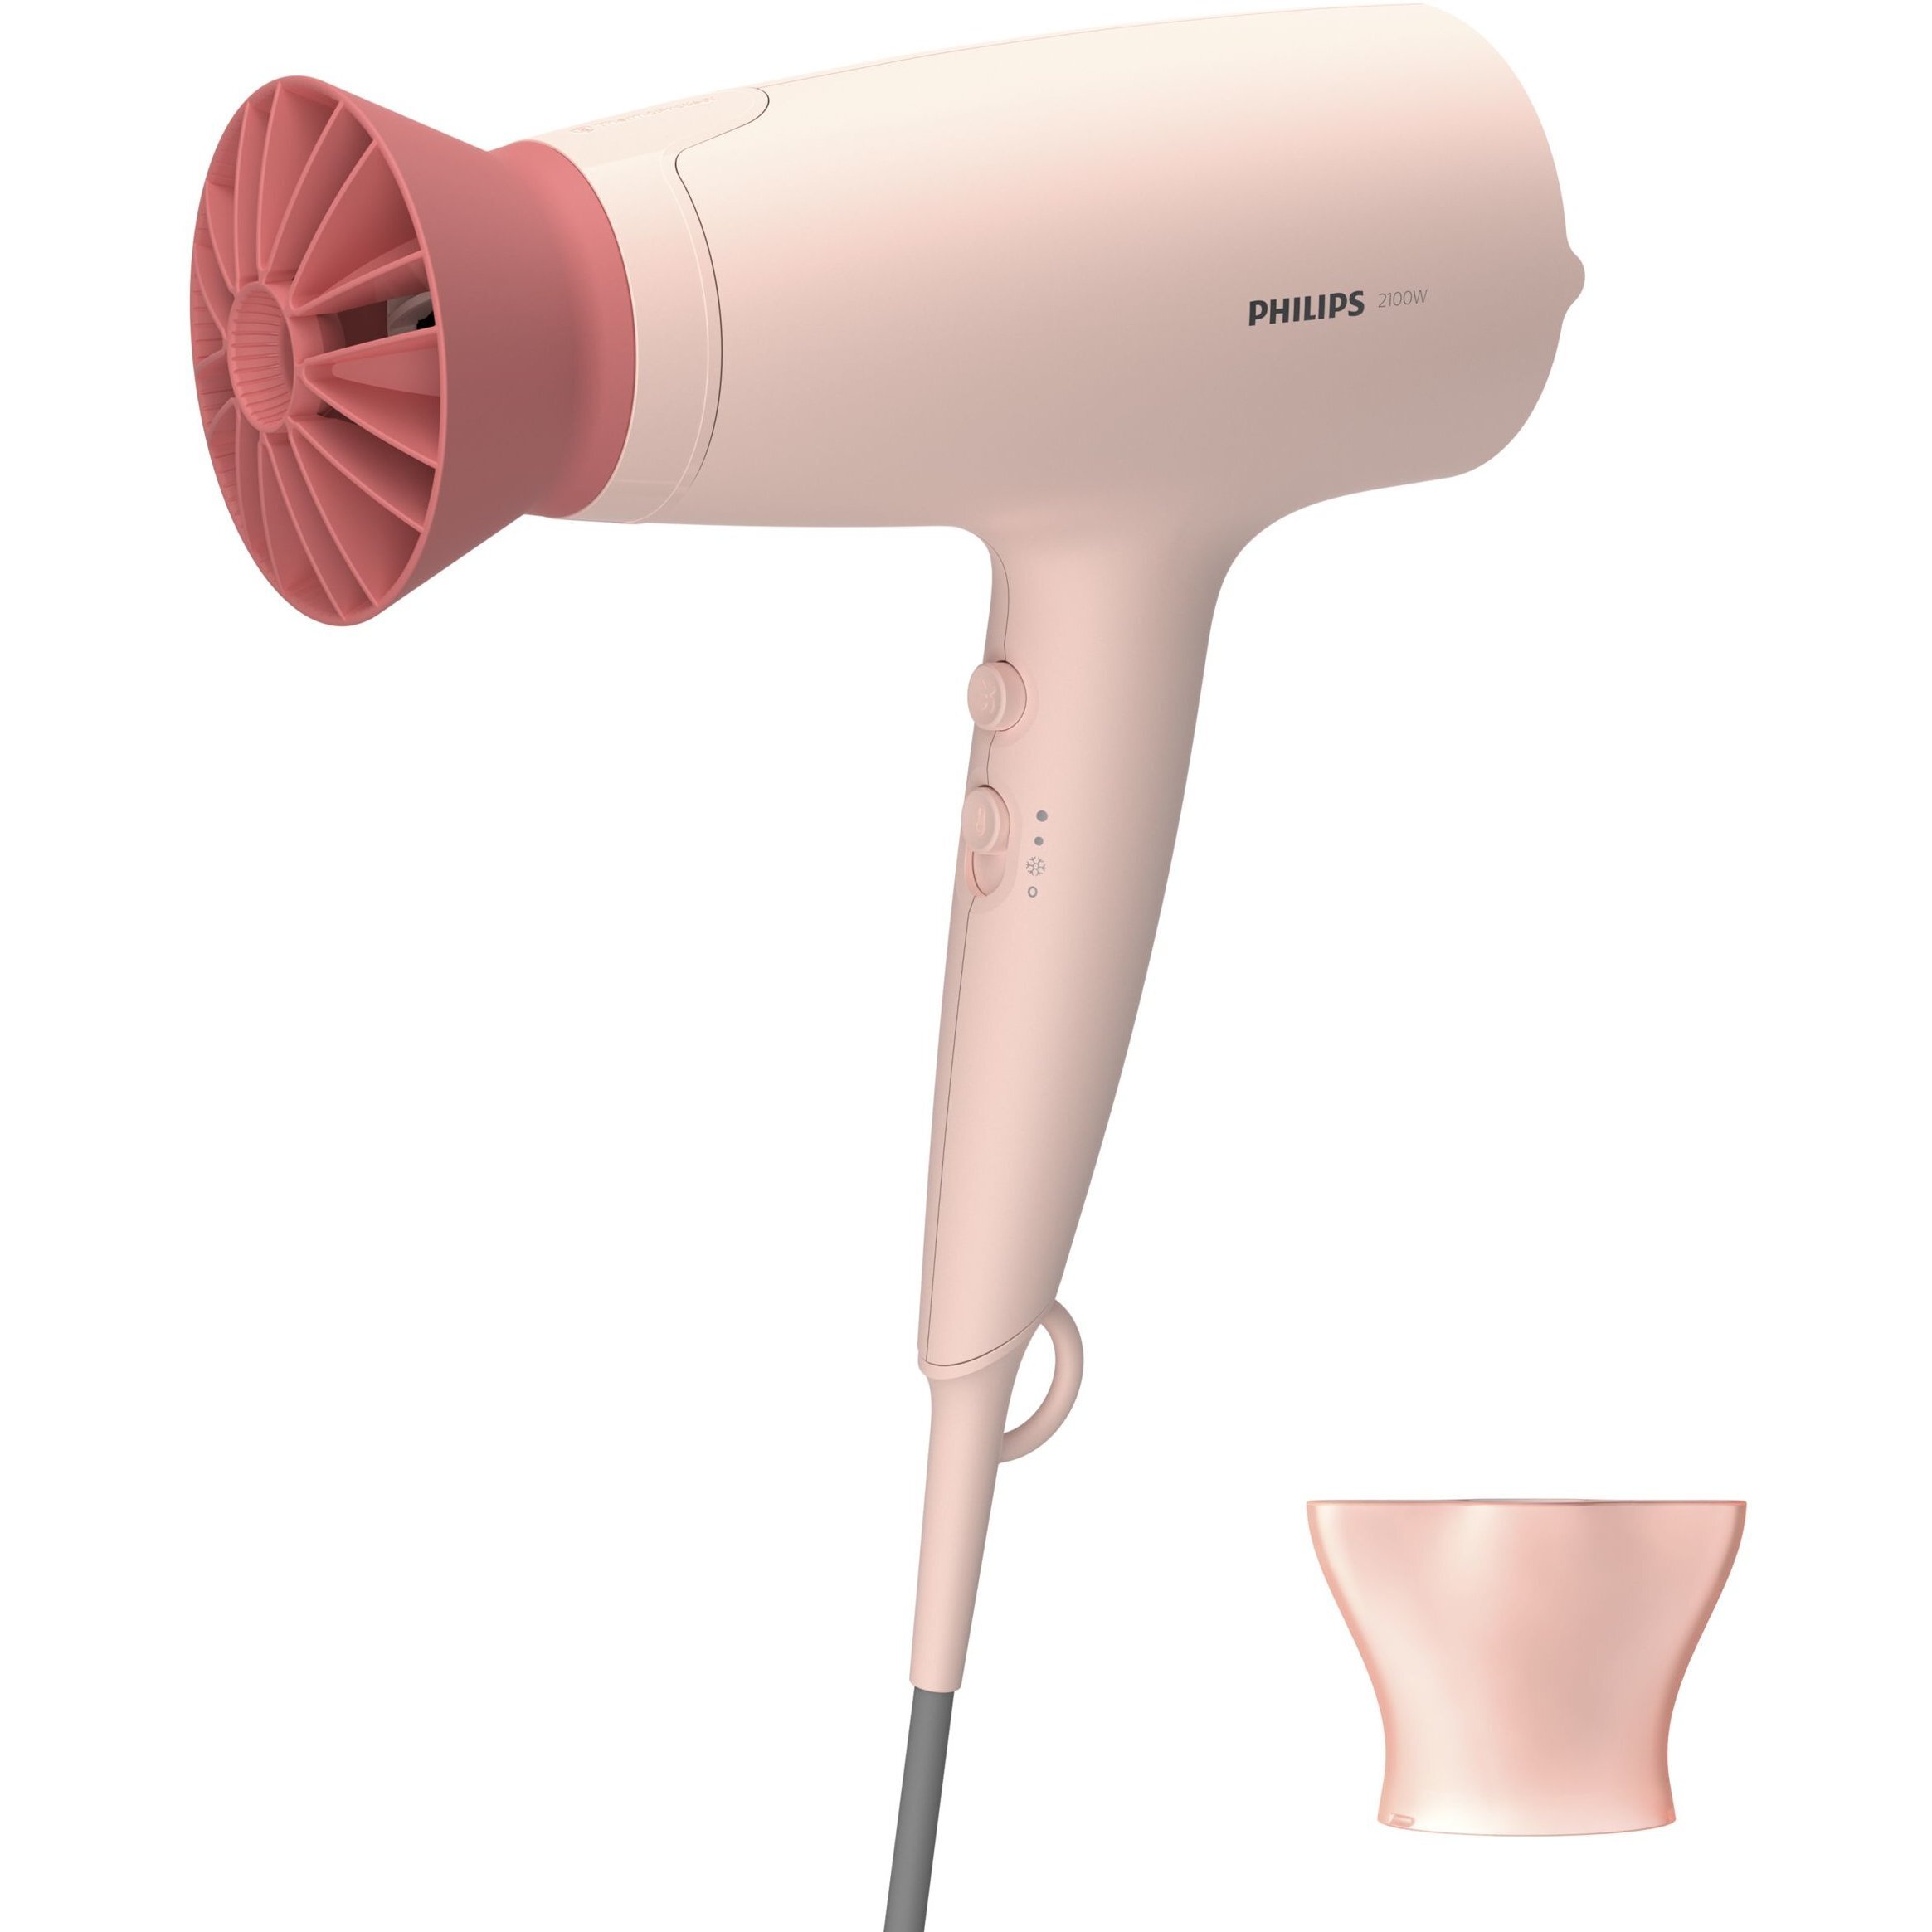 Philips - specifications hair buy dryer: reviews, Ukraine: Lviv, stores prices, Series price in Odessa (BHD342/10) Dnepropetrovsk, BHD342 Kyiv, > 3000